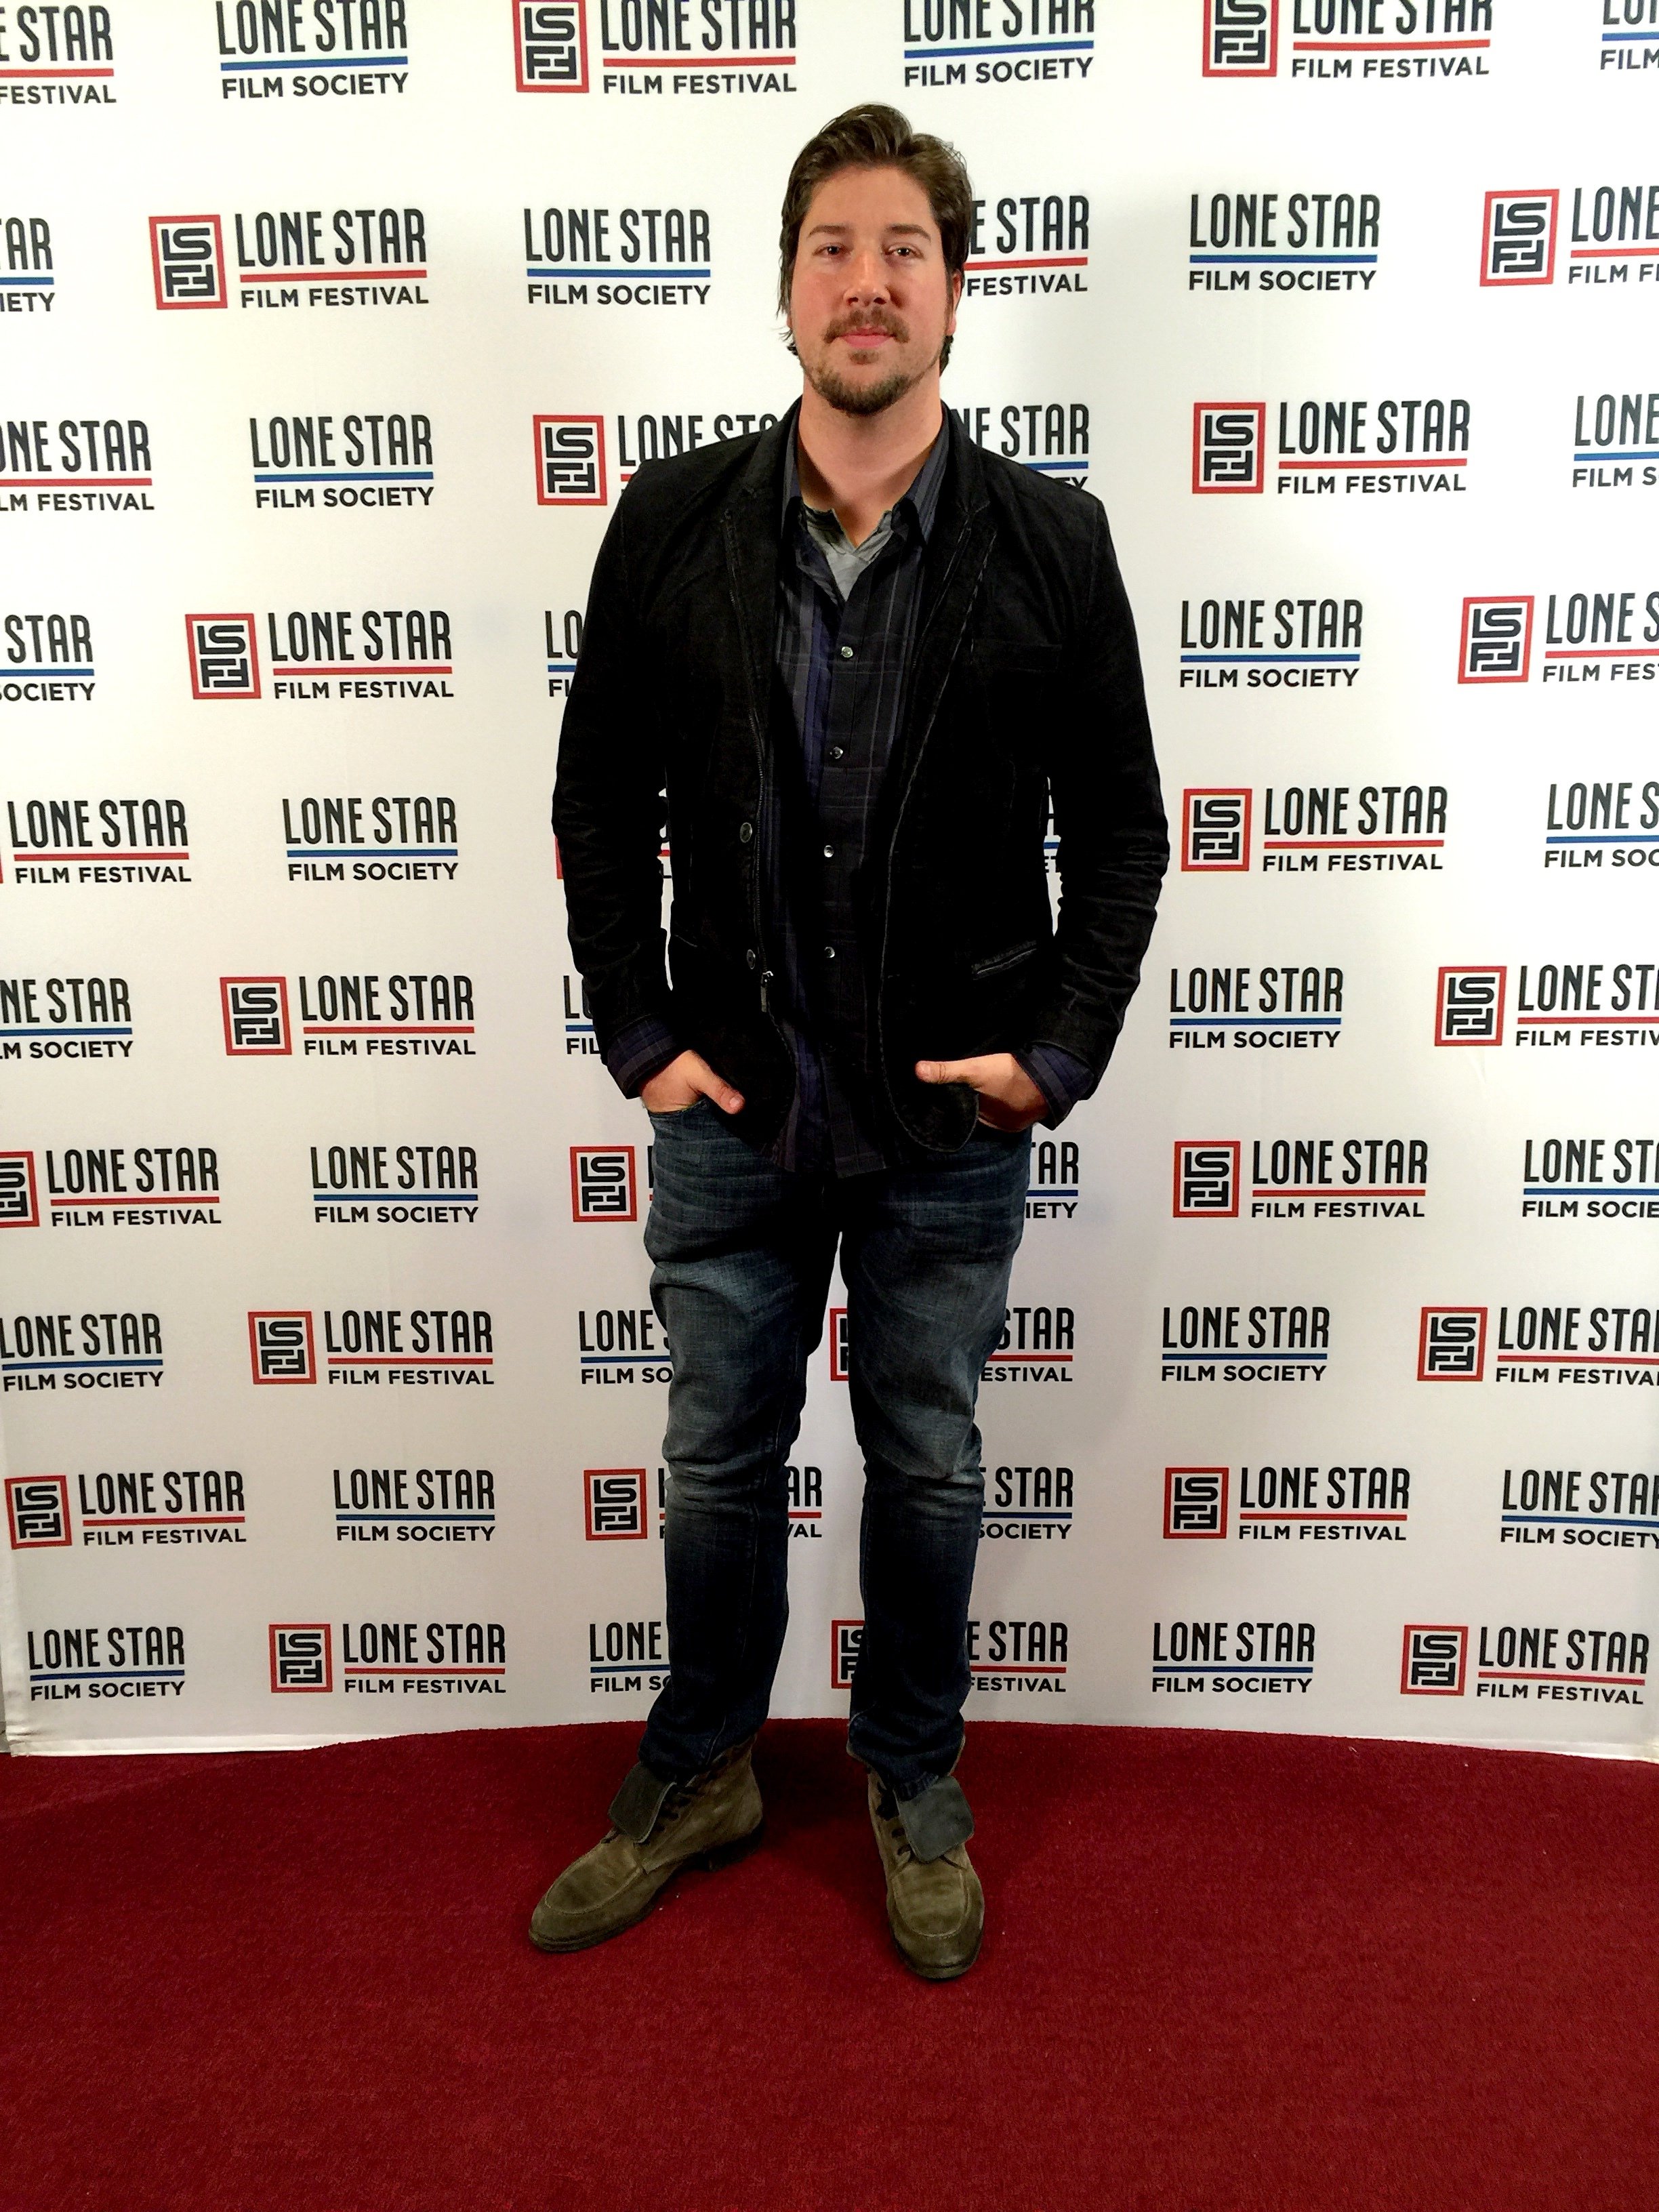 Tanner Beard on the carpet at the Texas Premier of 